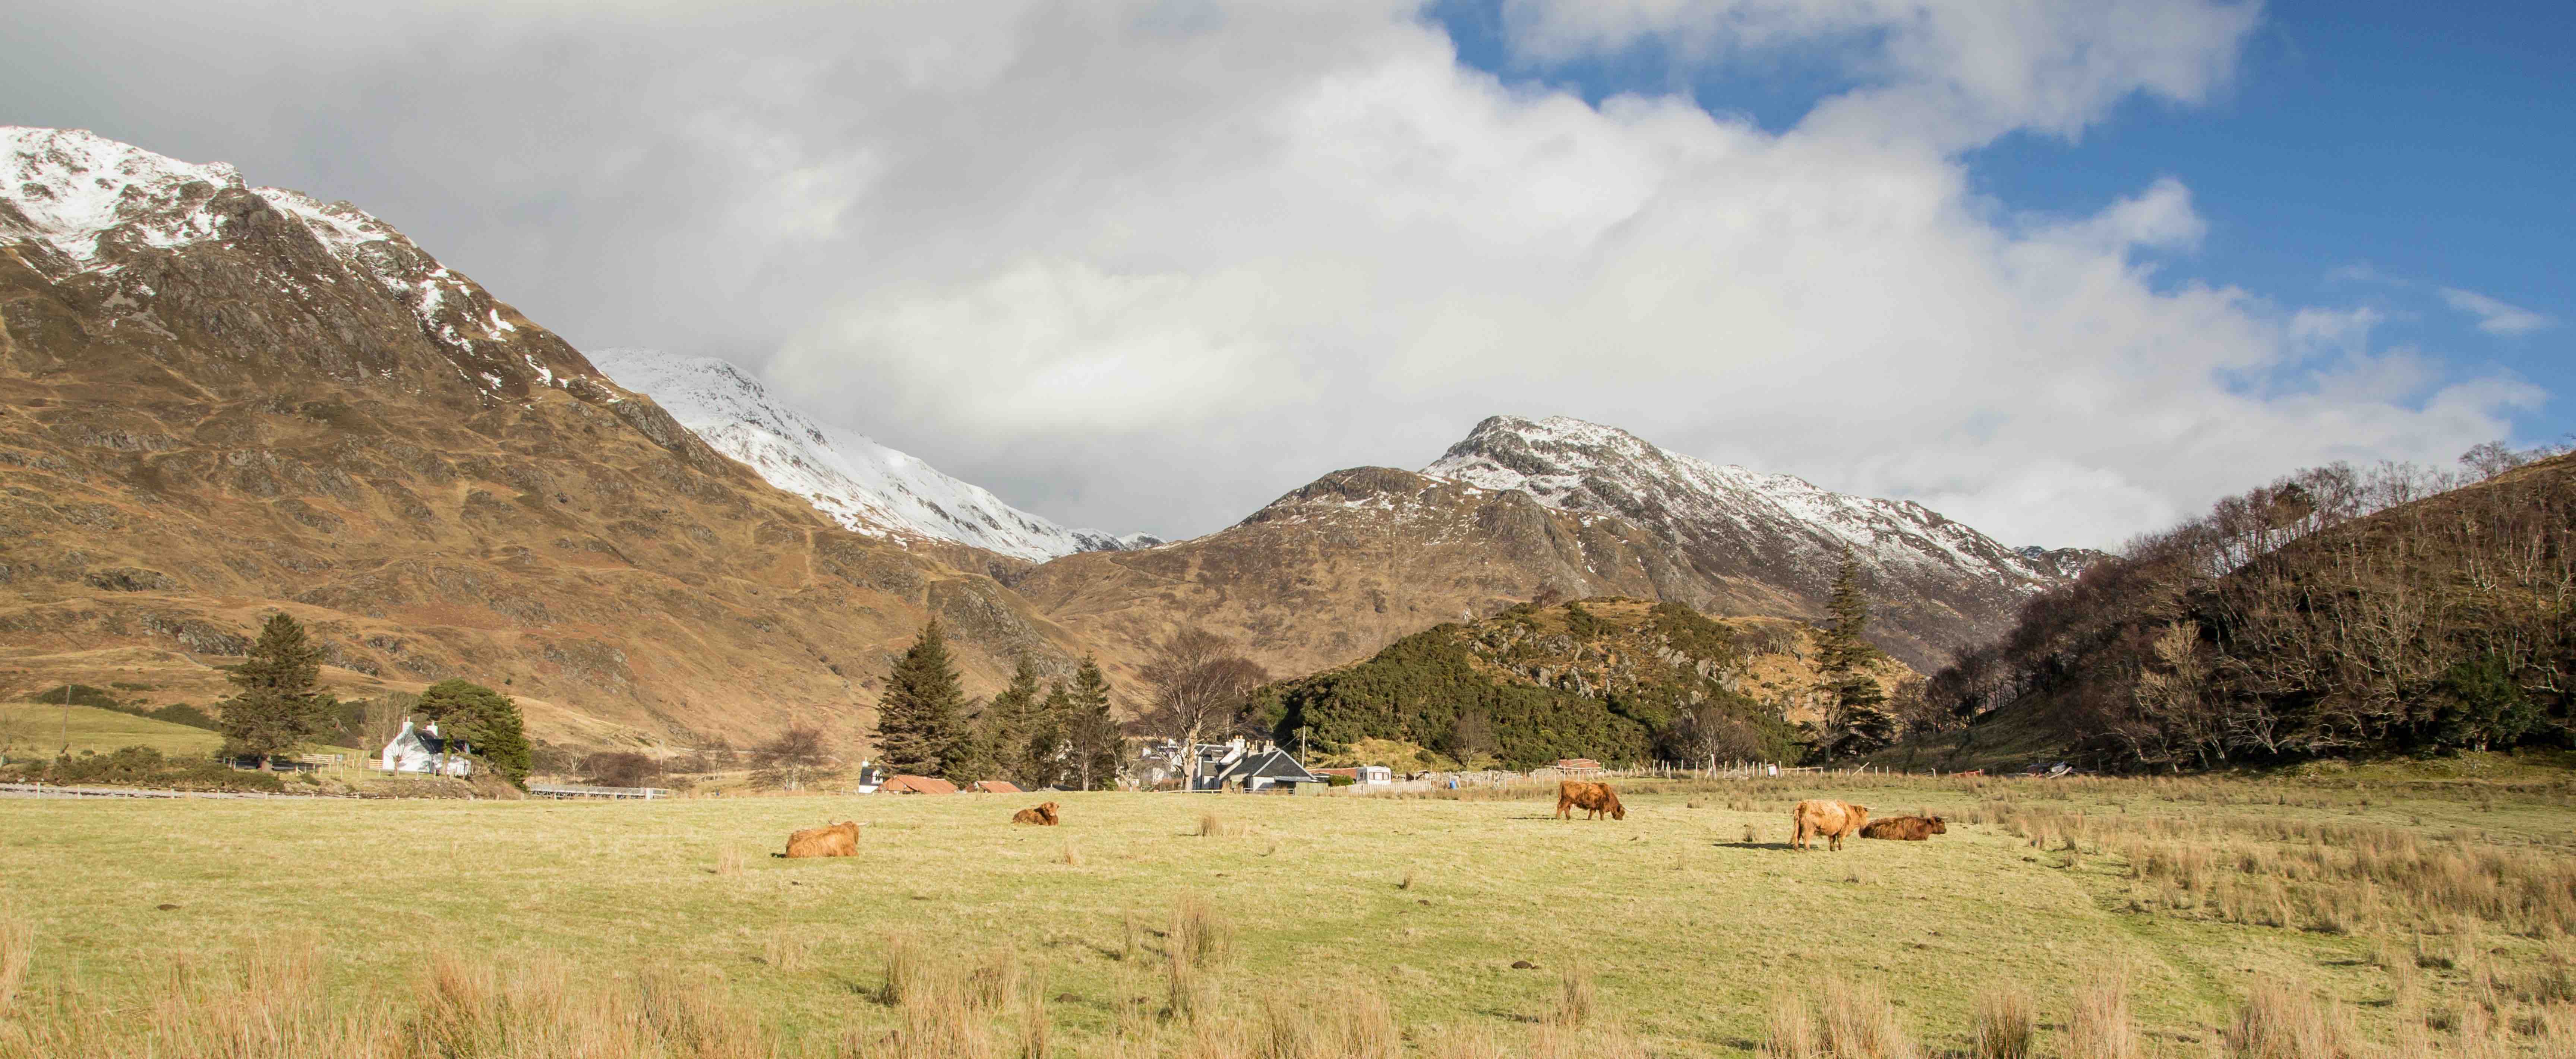 Highland cows grazing meadow in valley surrounded by mountains